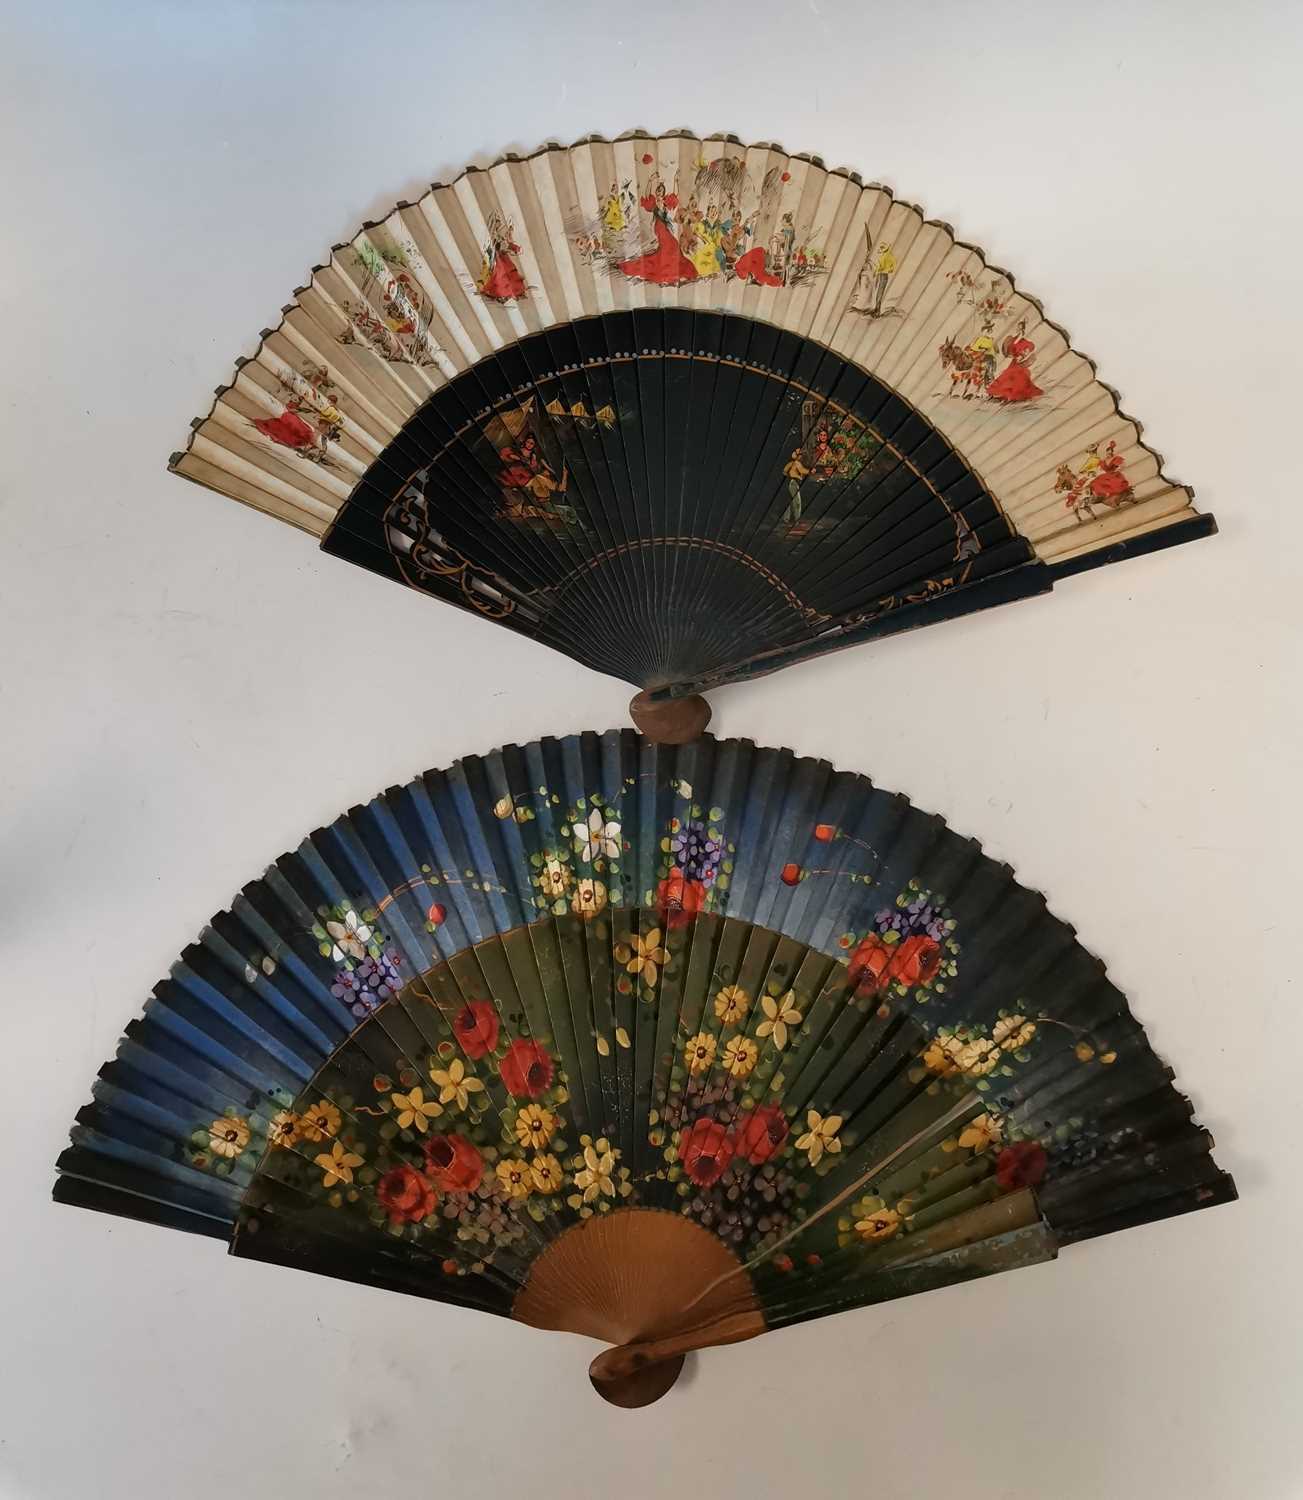 Lot 23 - Two vintage hand painted Spanish hand fans.